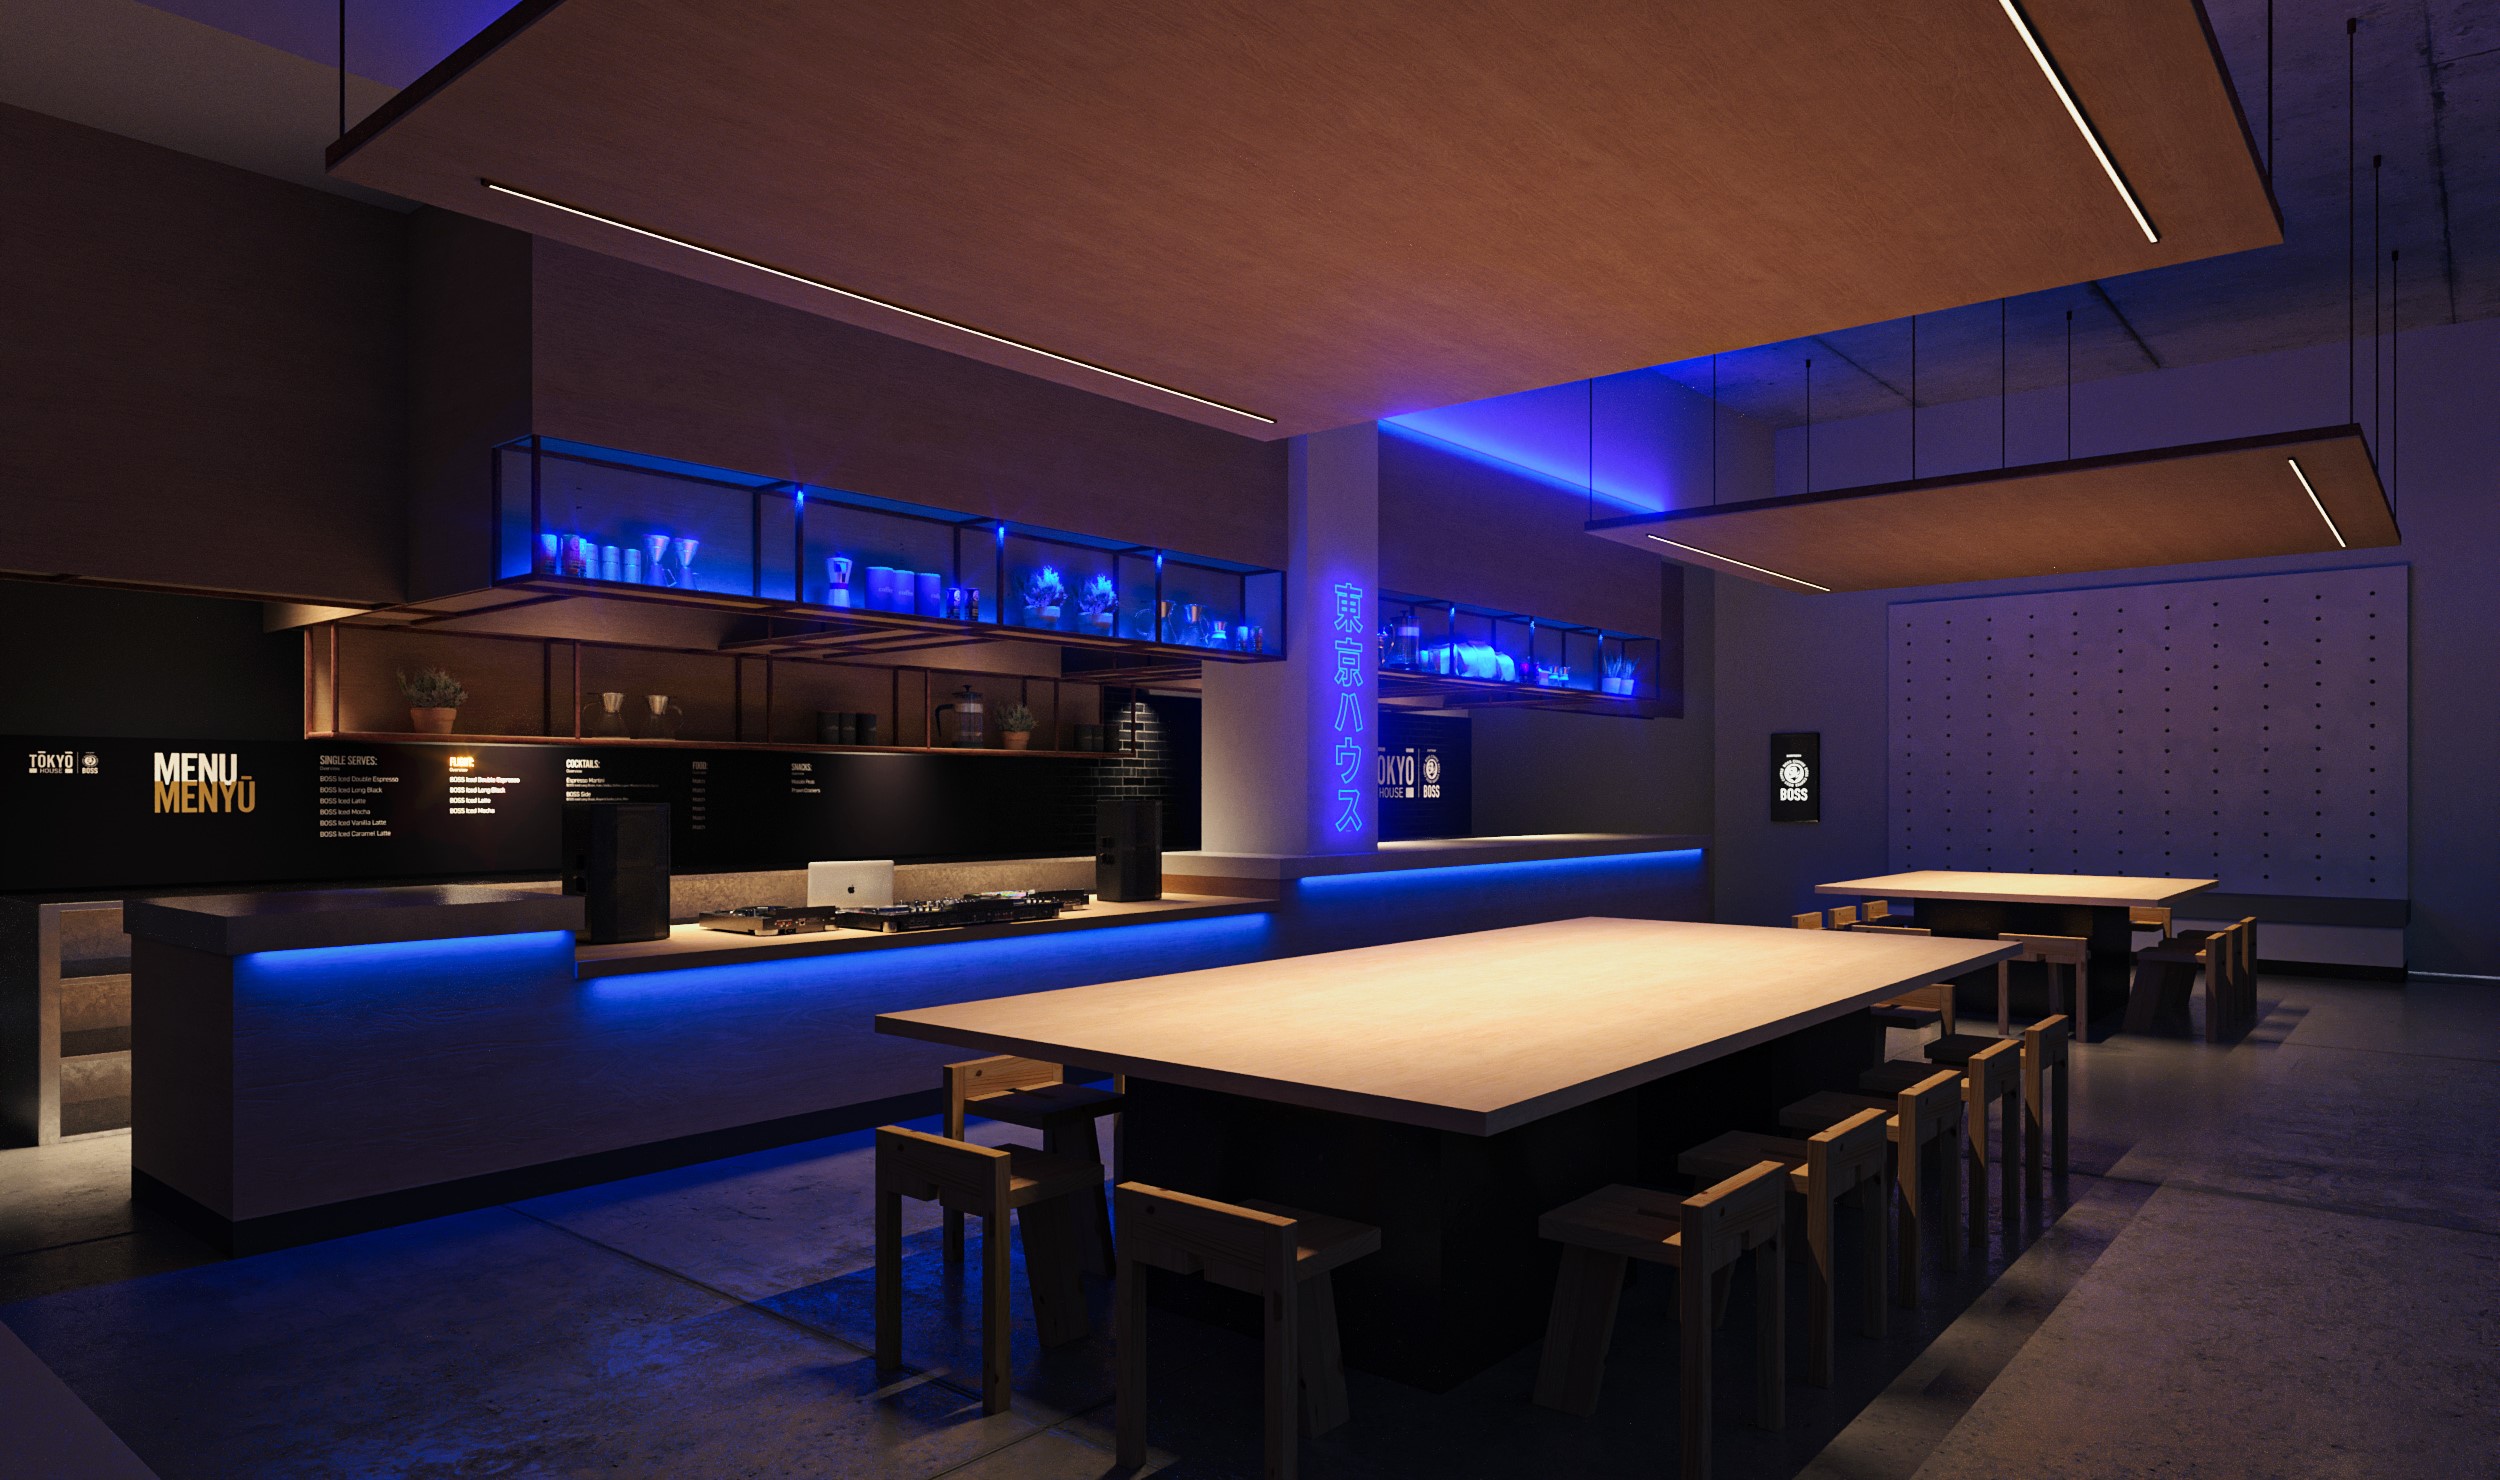 TOKYO HOUSE brought to you by Suntory BOSS Coffee - Night Render 1